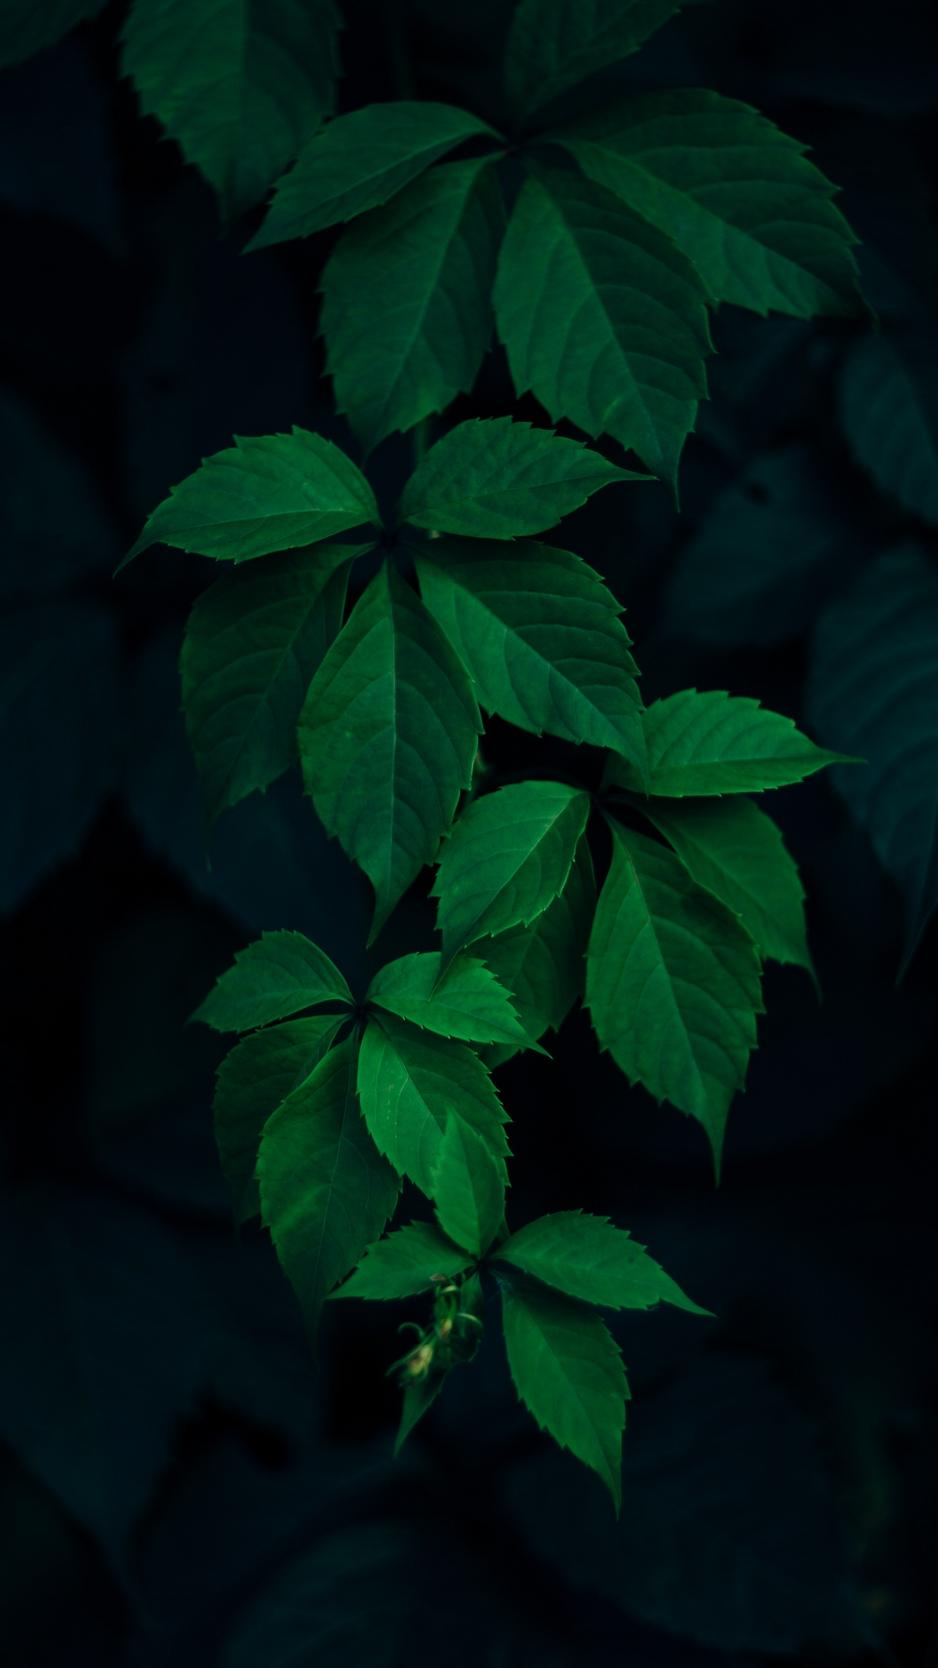 Download wallpaper 938x1668 leaves, green, branches, dark